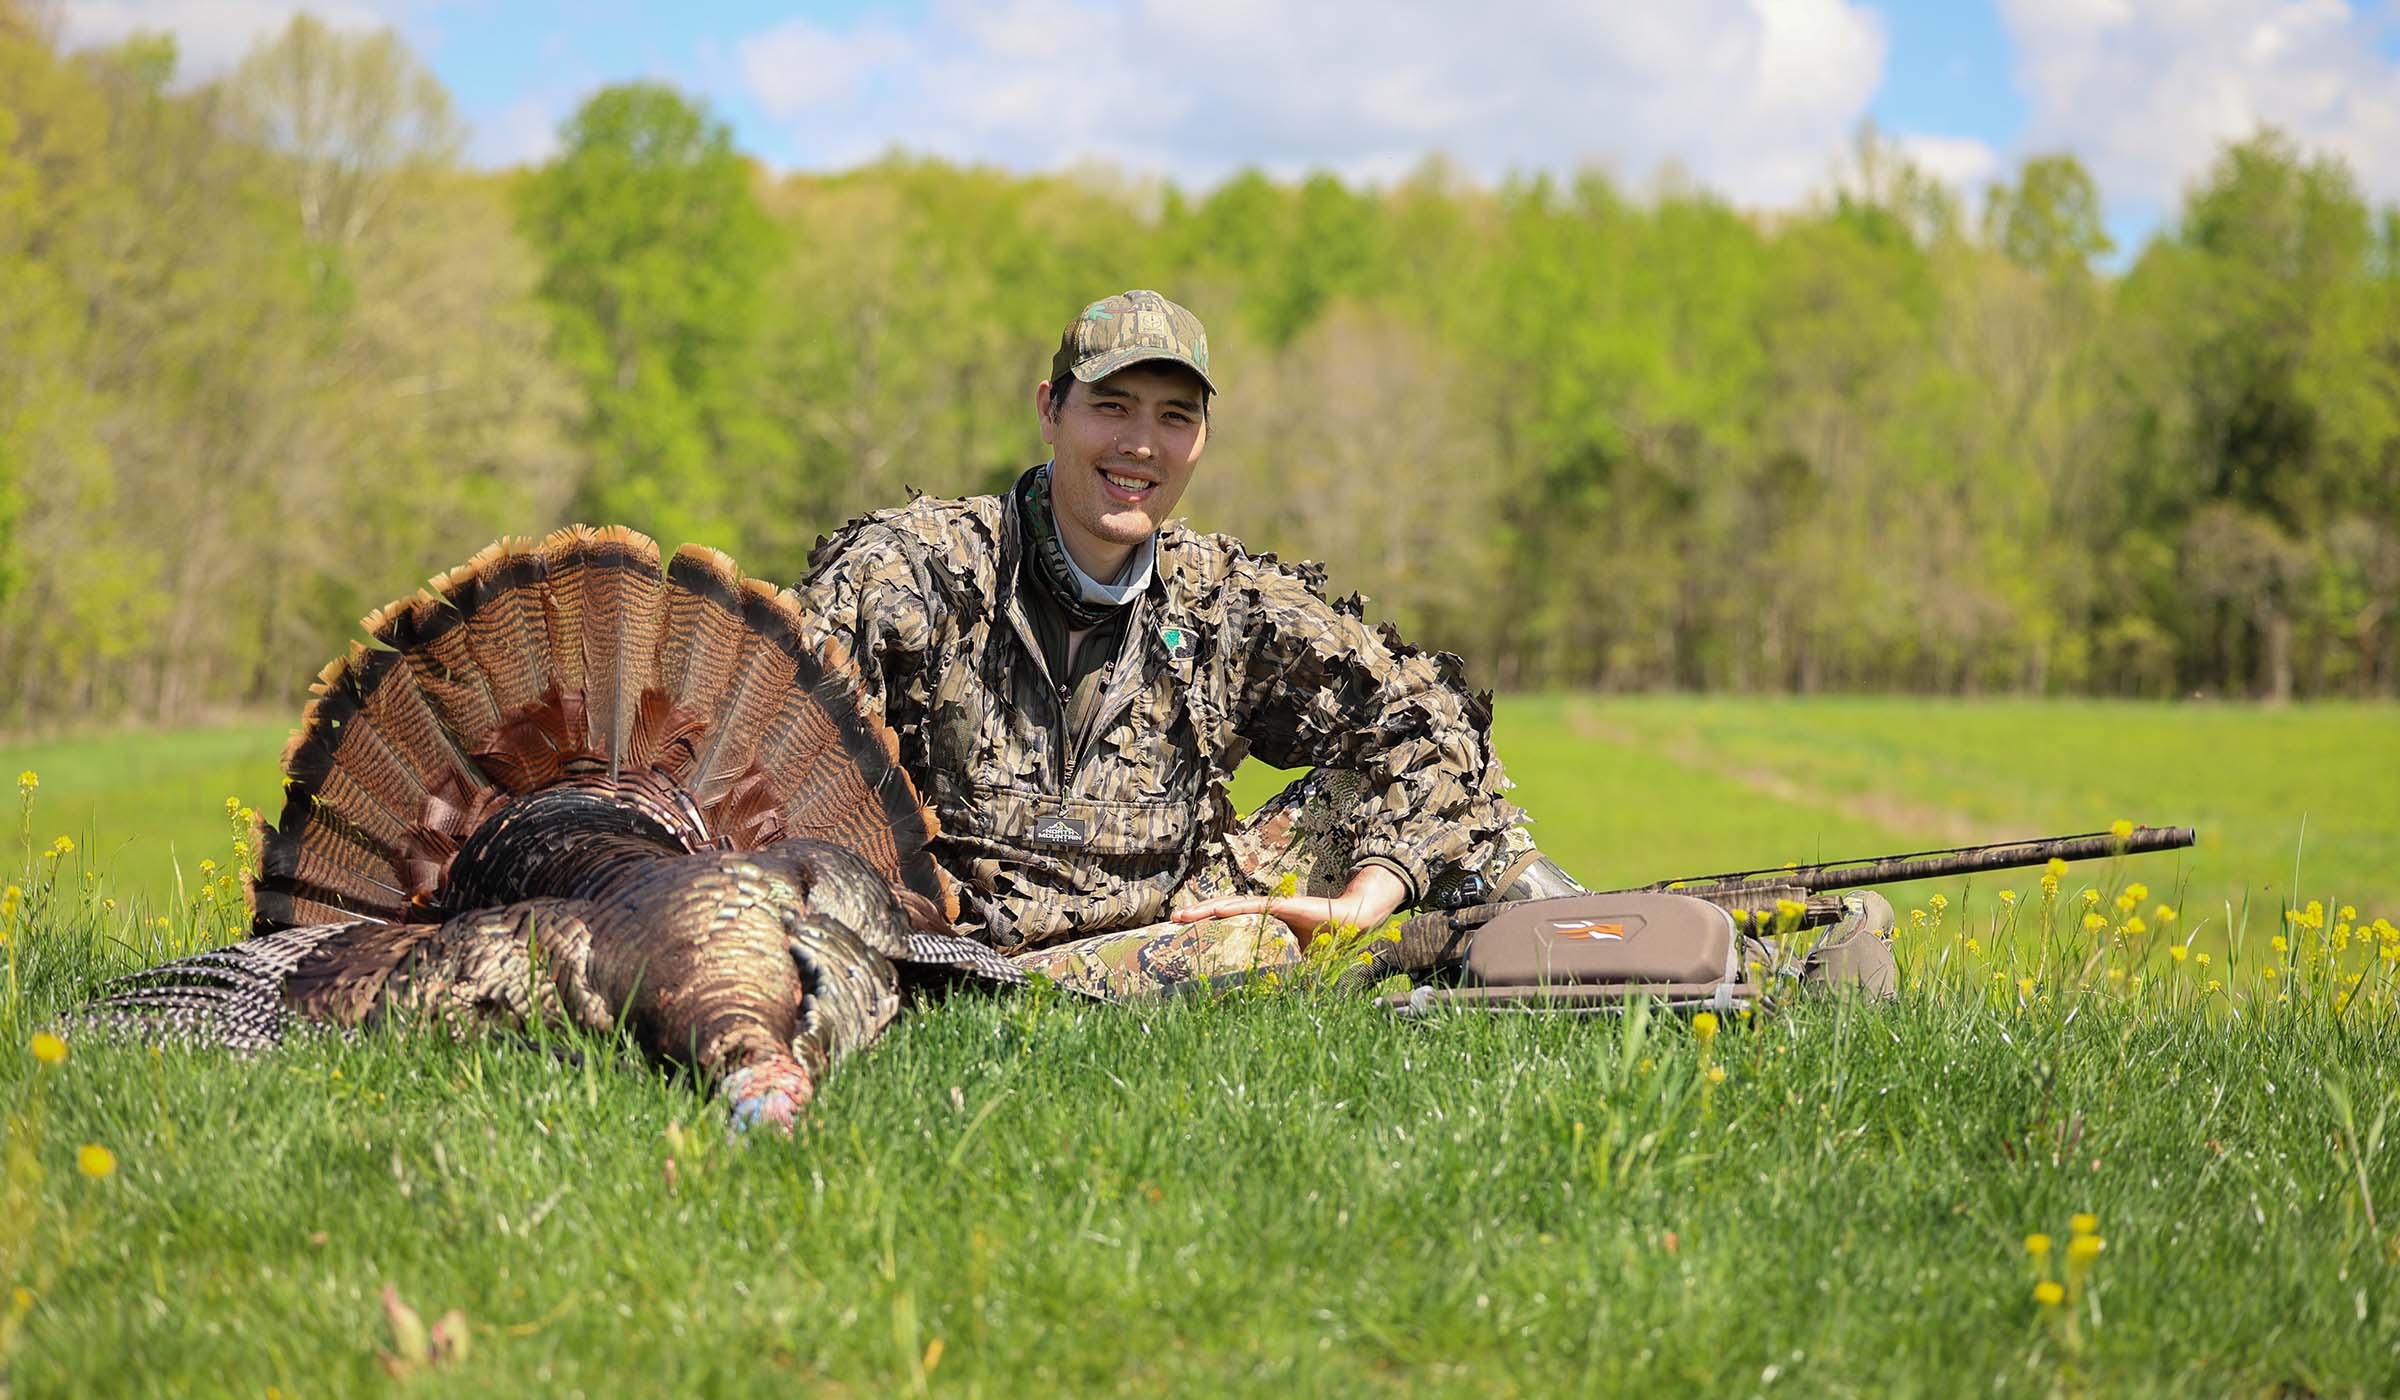 A hunter sits behind a longbeard and besid the Benelli M2